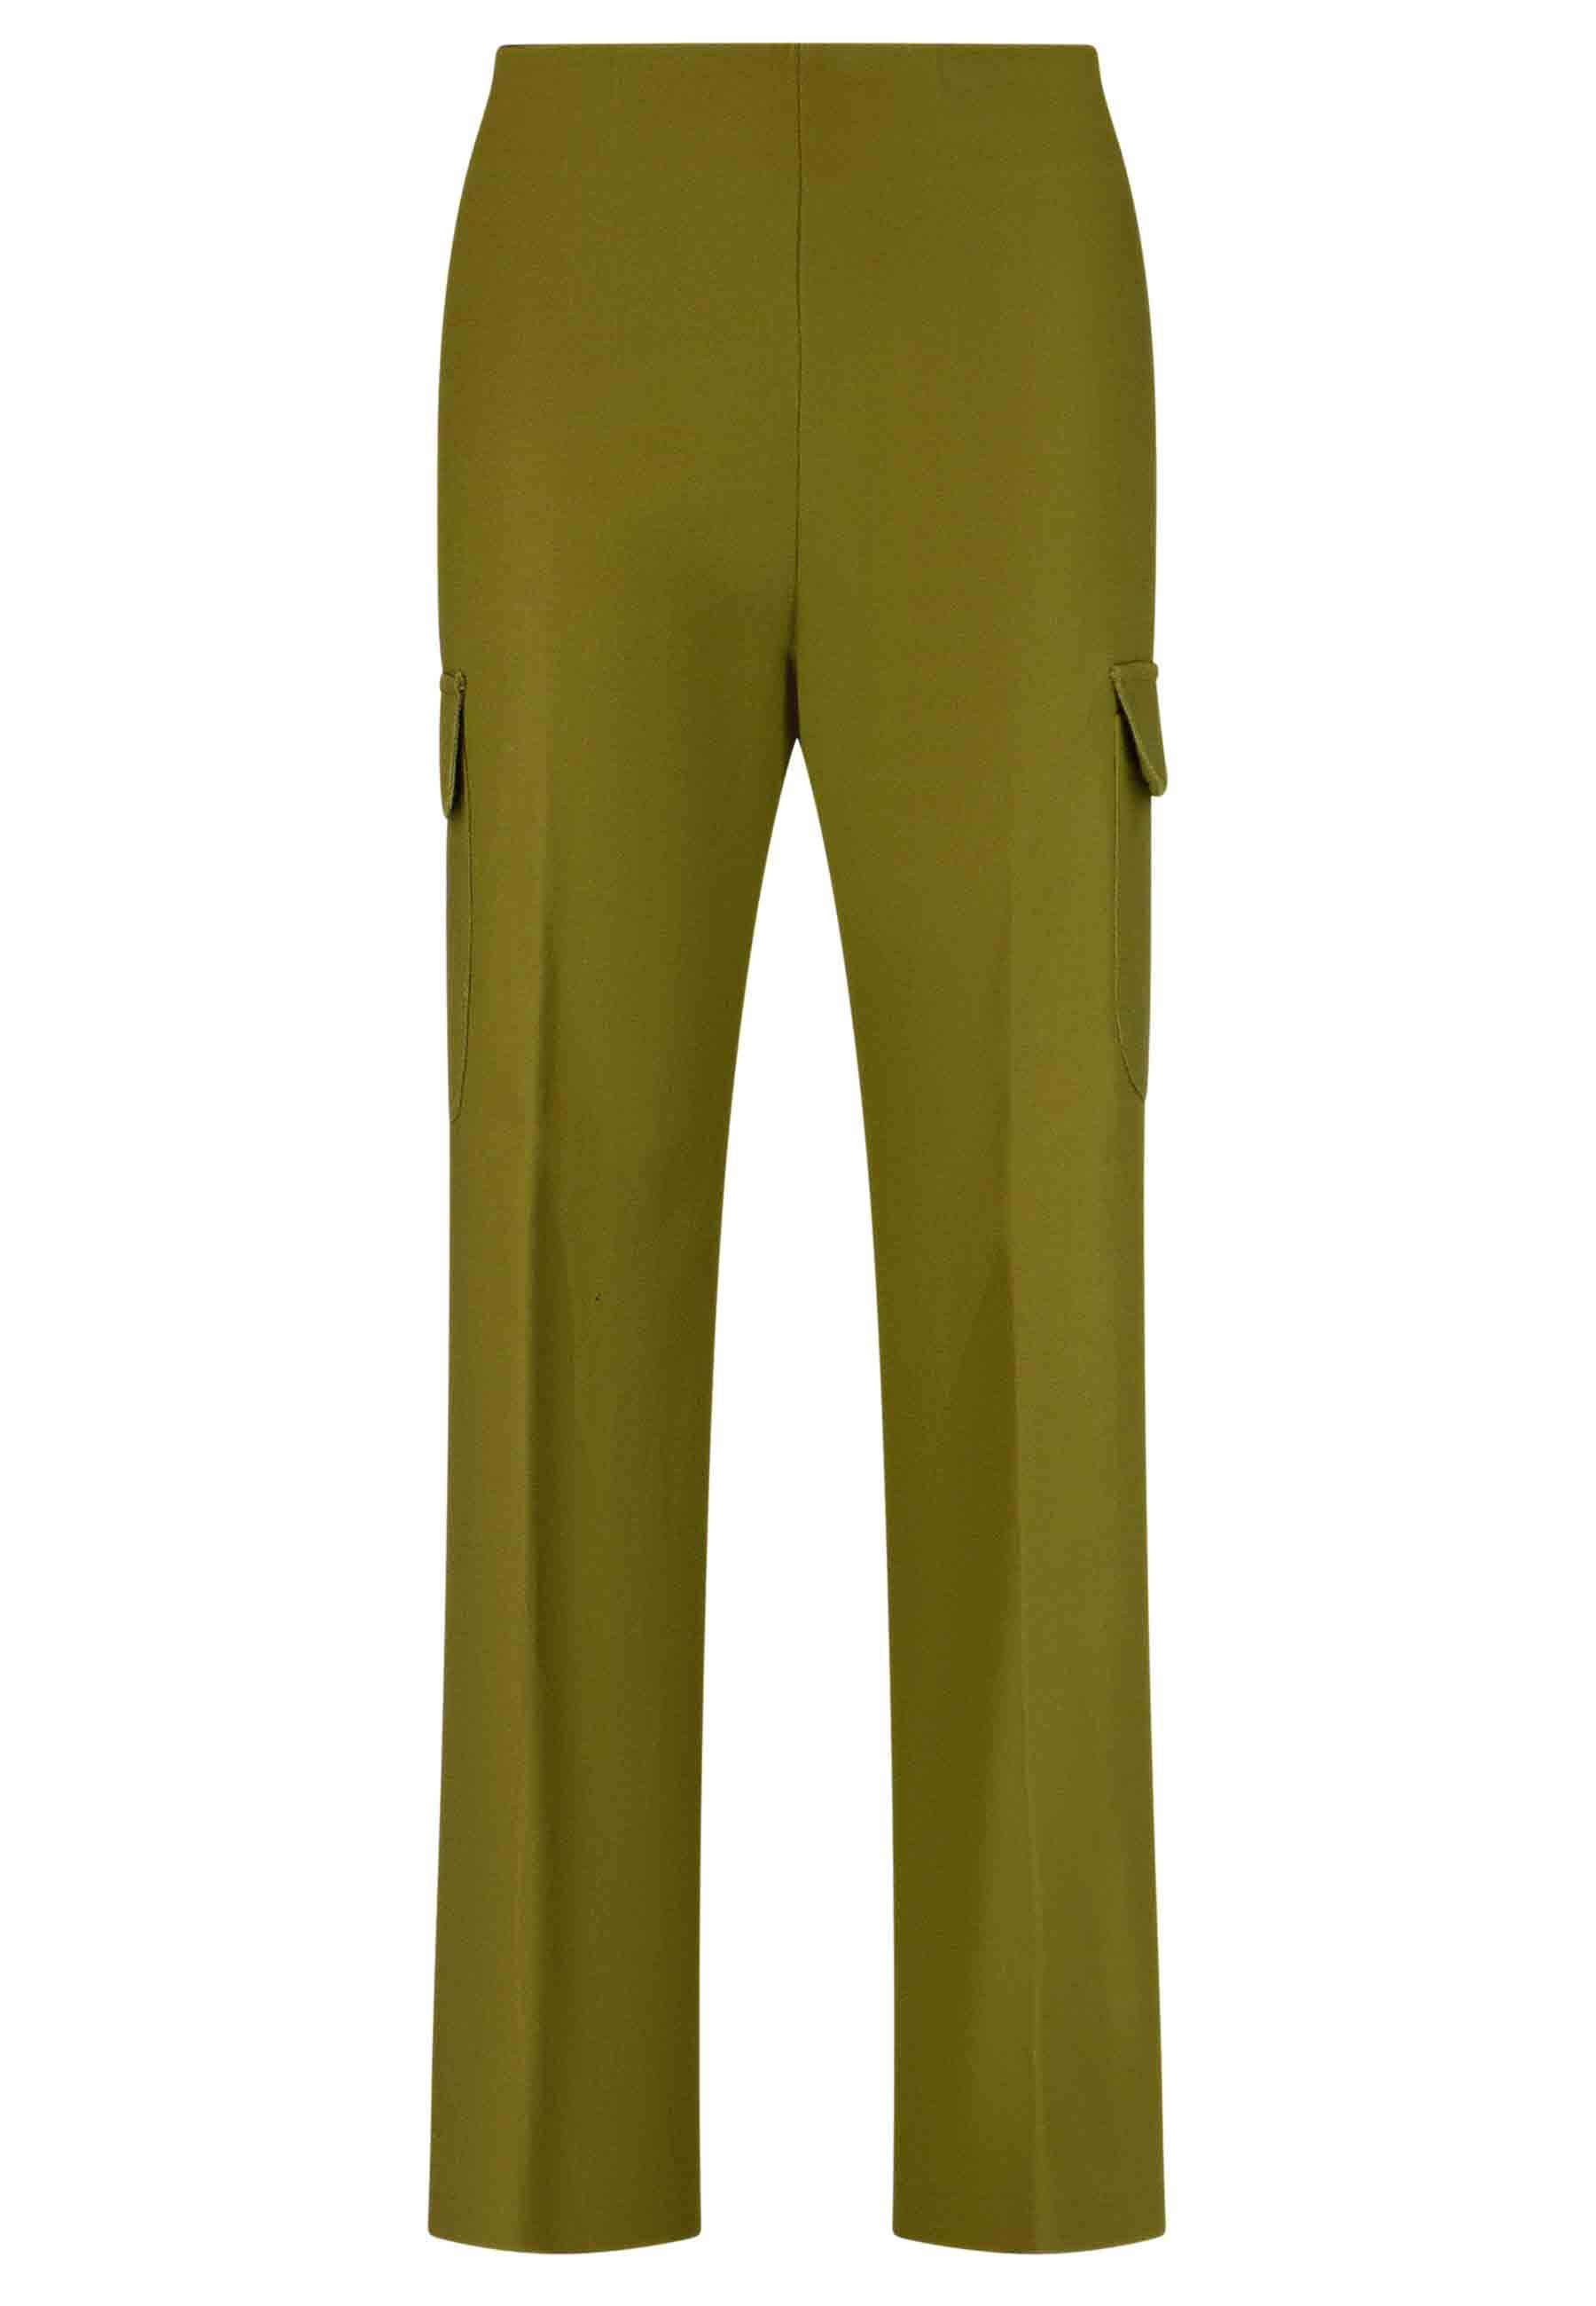 Women's green cotton cargo trousers with side pockets